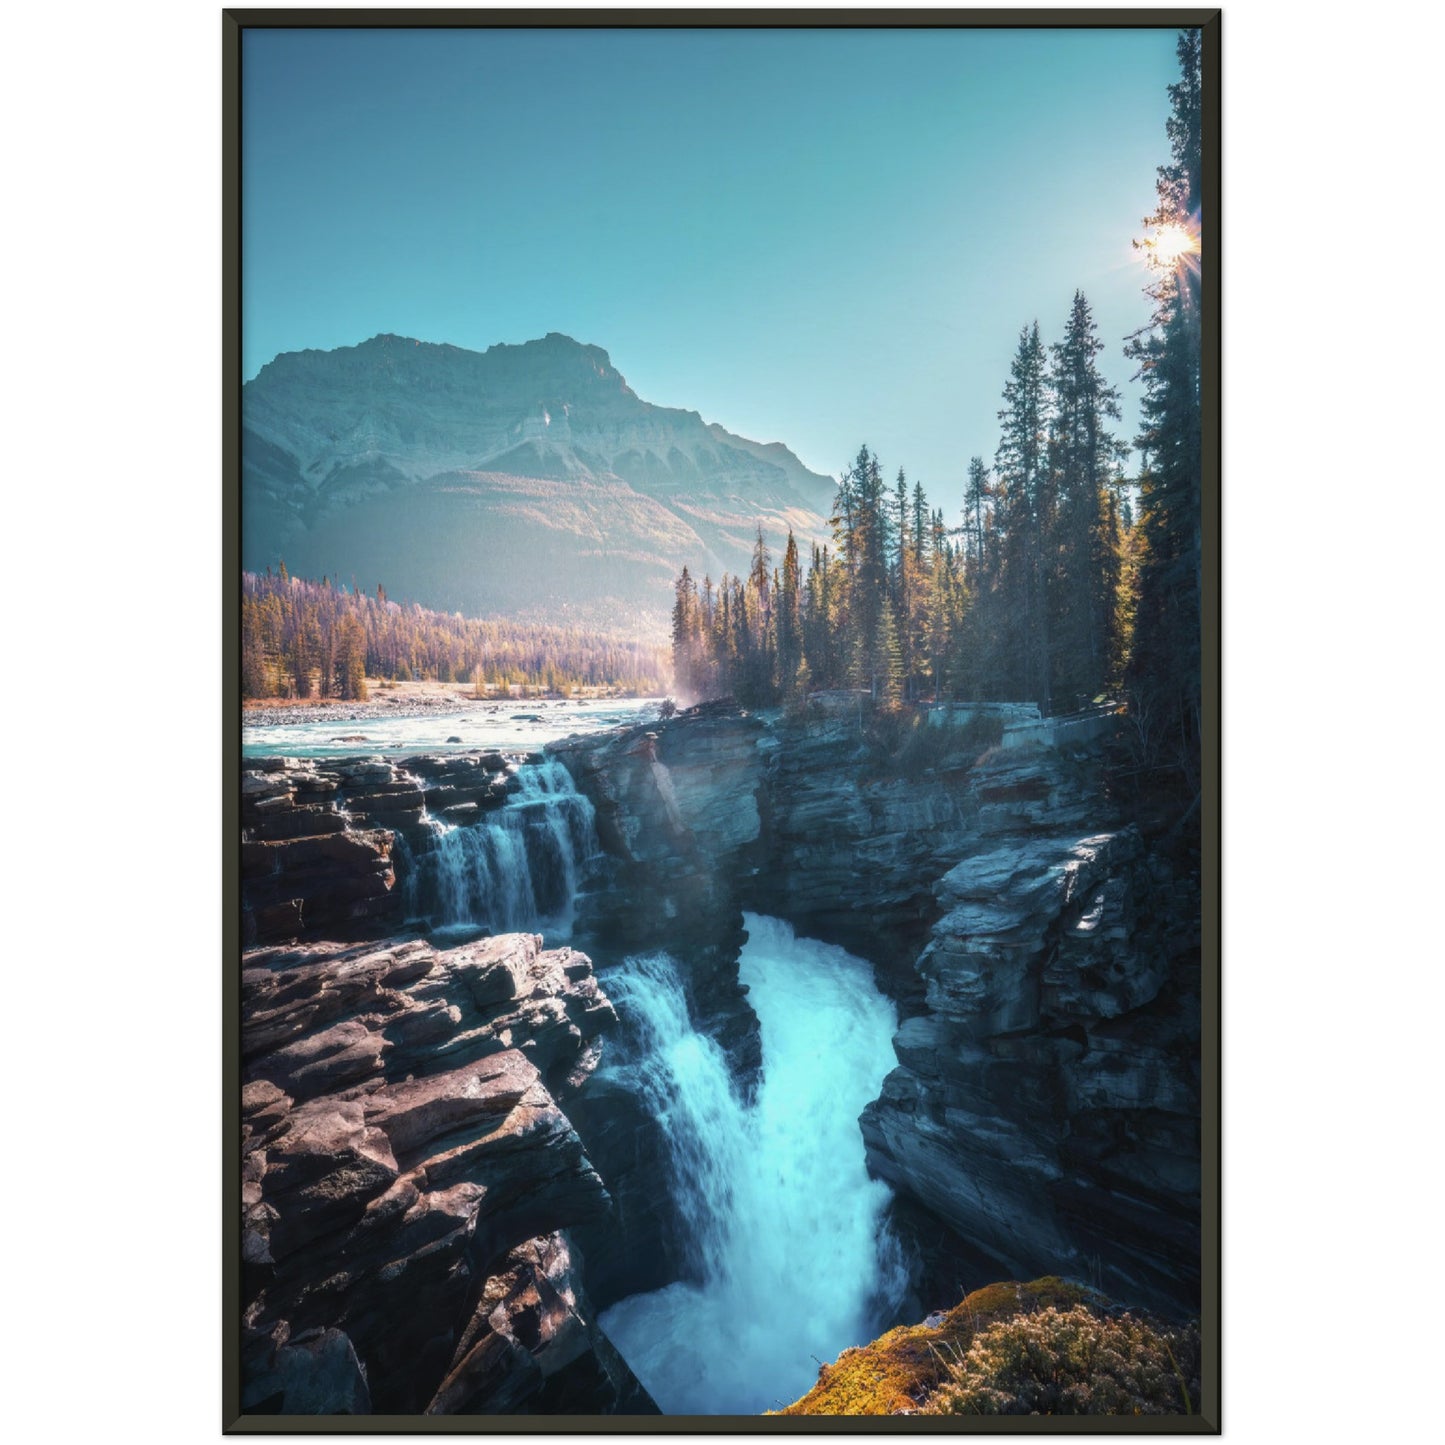 Don't Go chasing Waterfalls - Museum-Quality Matte Paper Metal Framed Poster